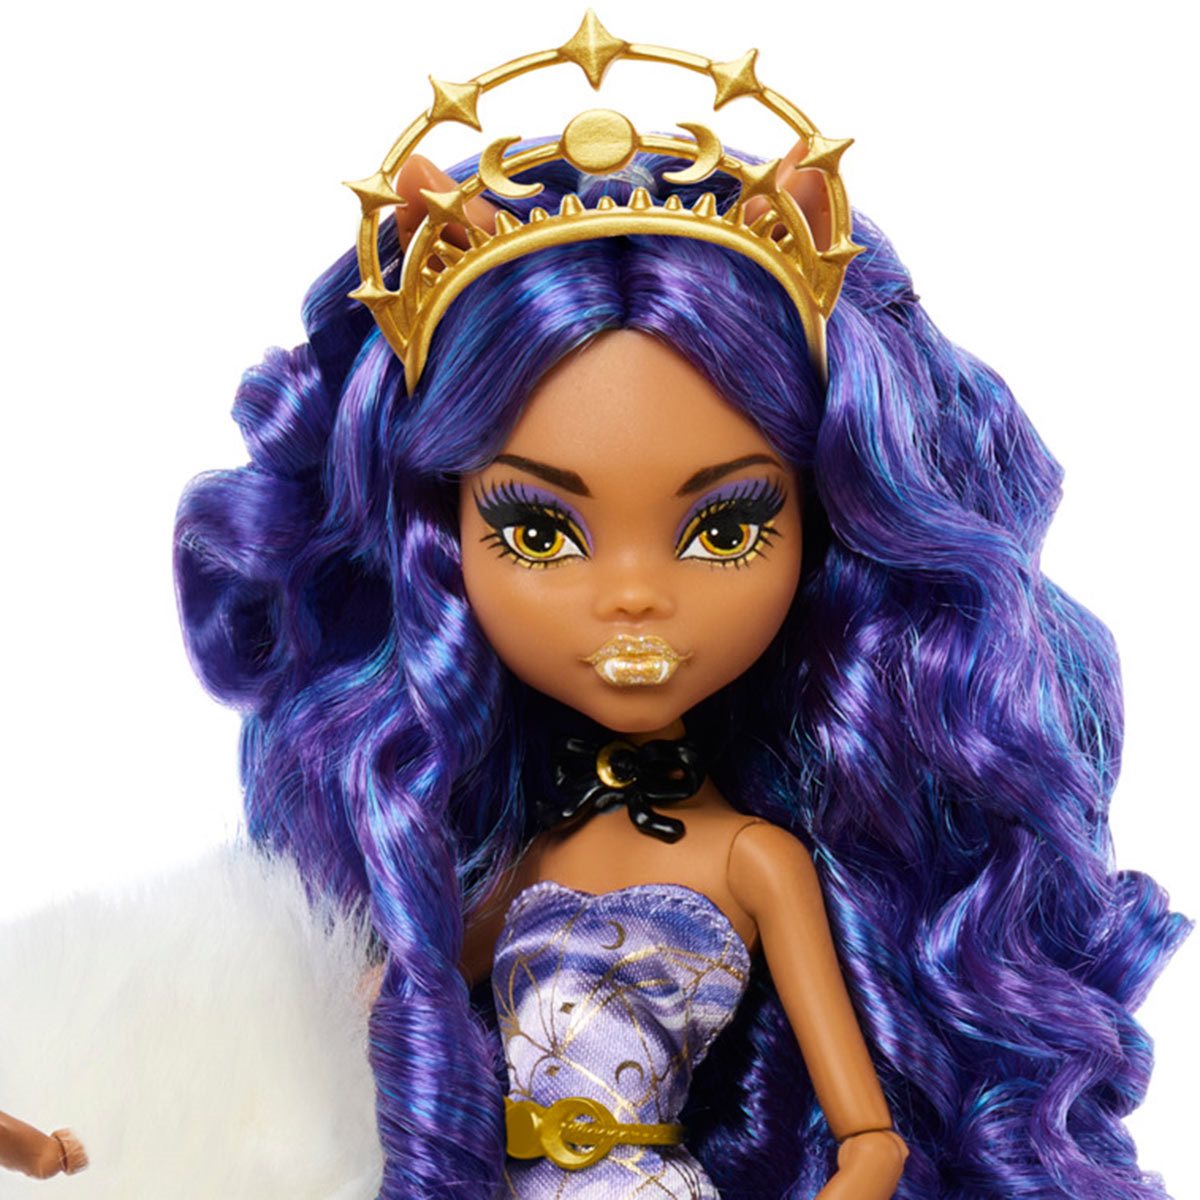 ashley creech add pictures of clawdeen wolf photo